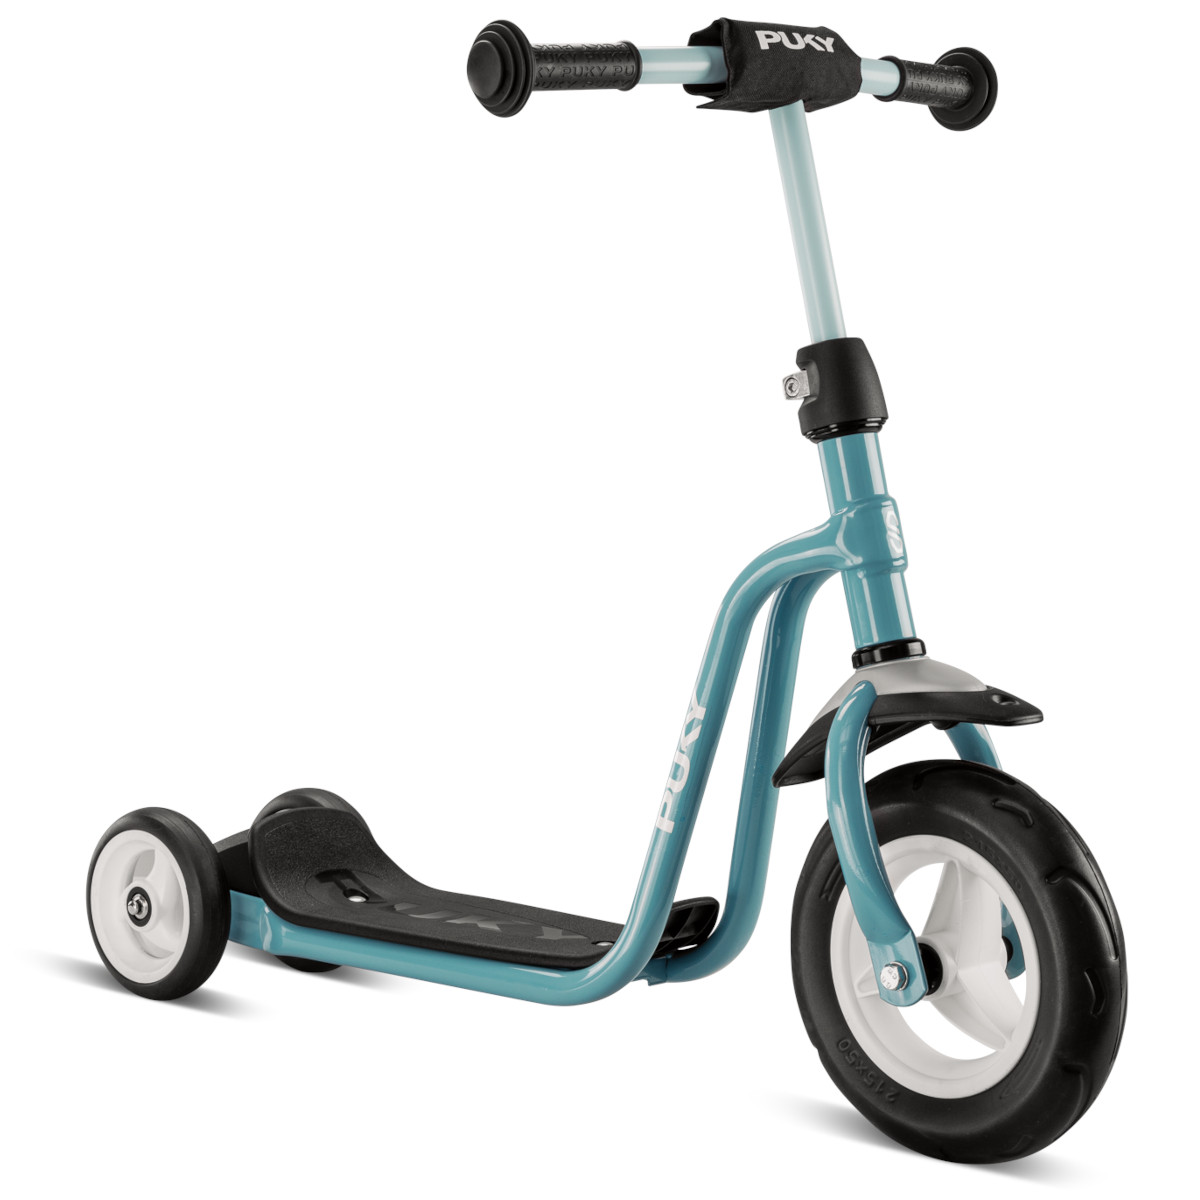 Productfoto van Puky R 1 Kinderscooter - pastell blue